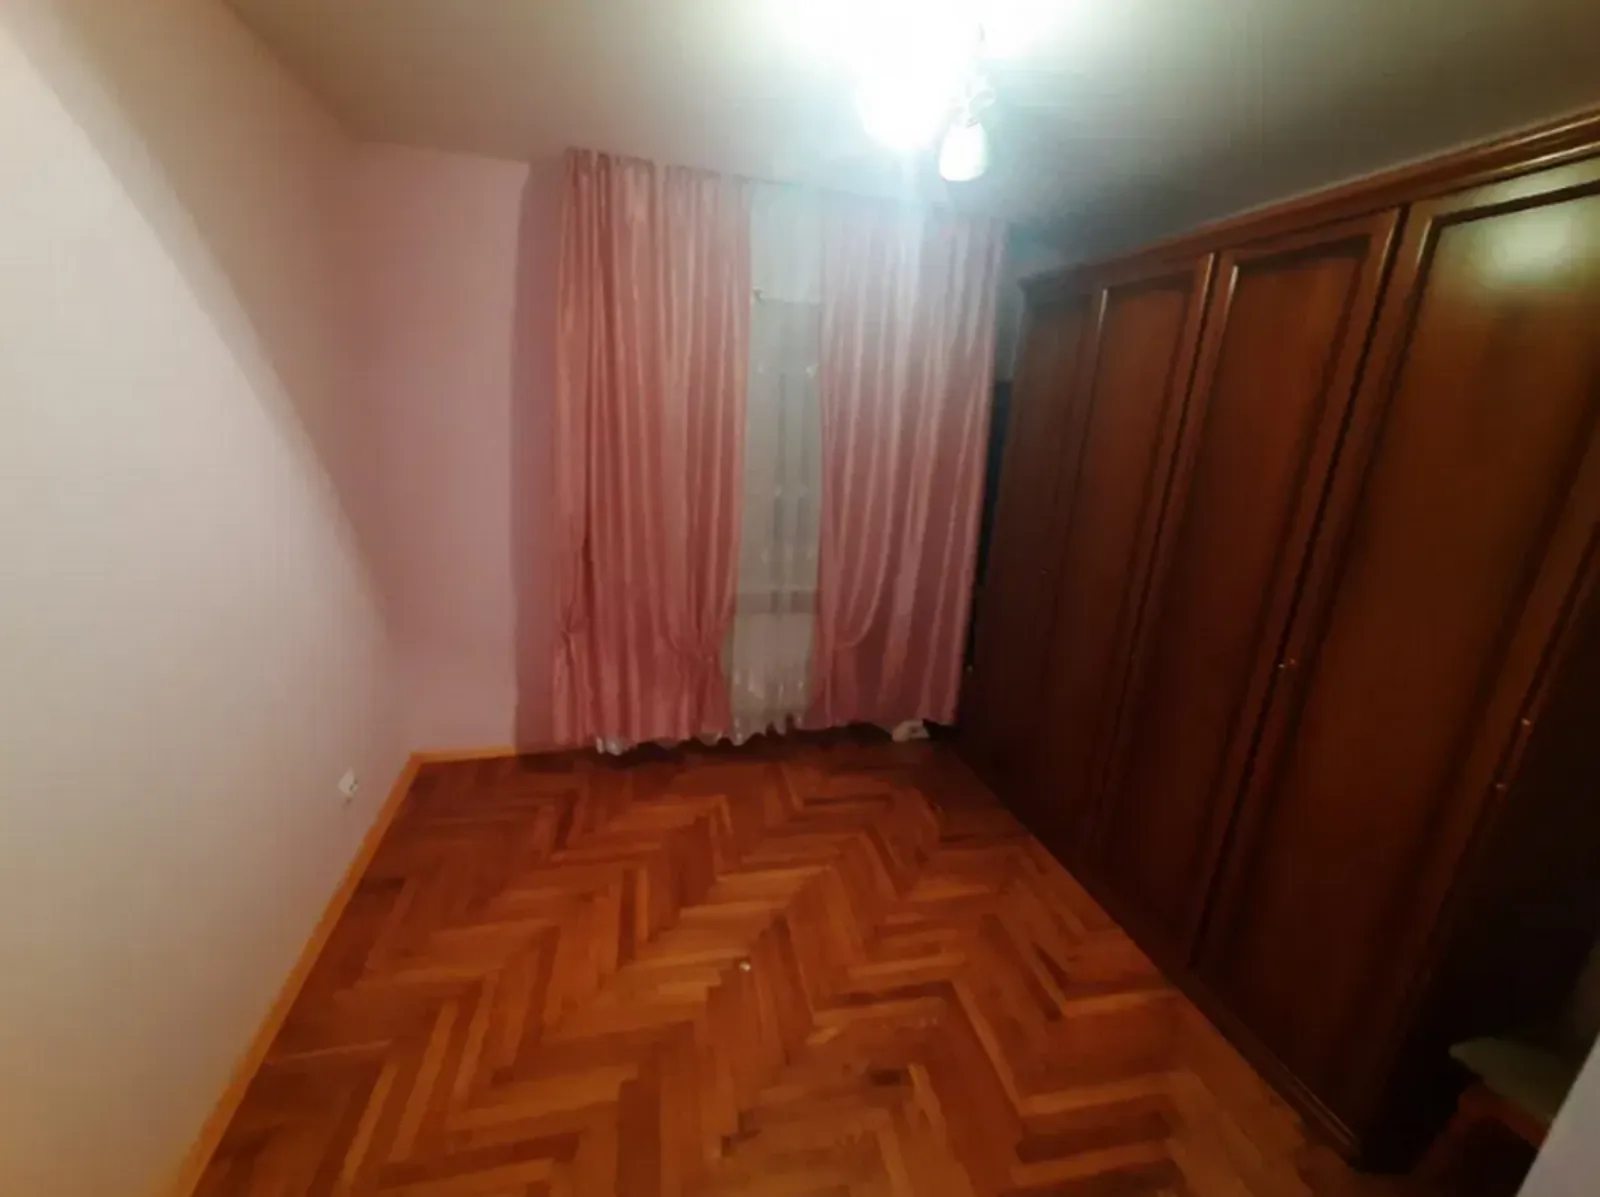 Apartments for sale. 3 rooms, 65 m², 4th floor/9 floors. Bam, Ternopil. 